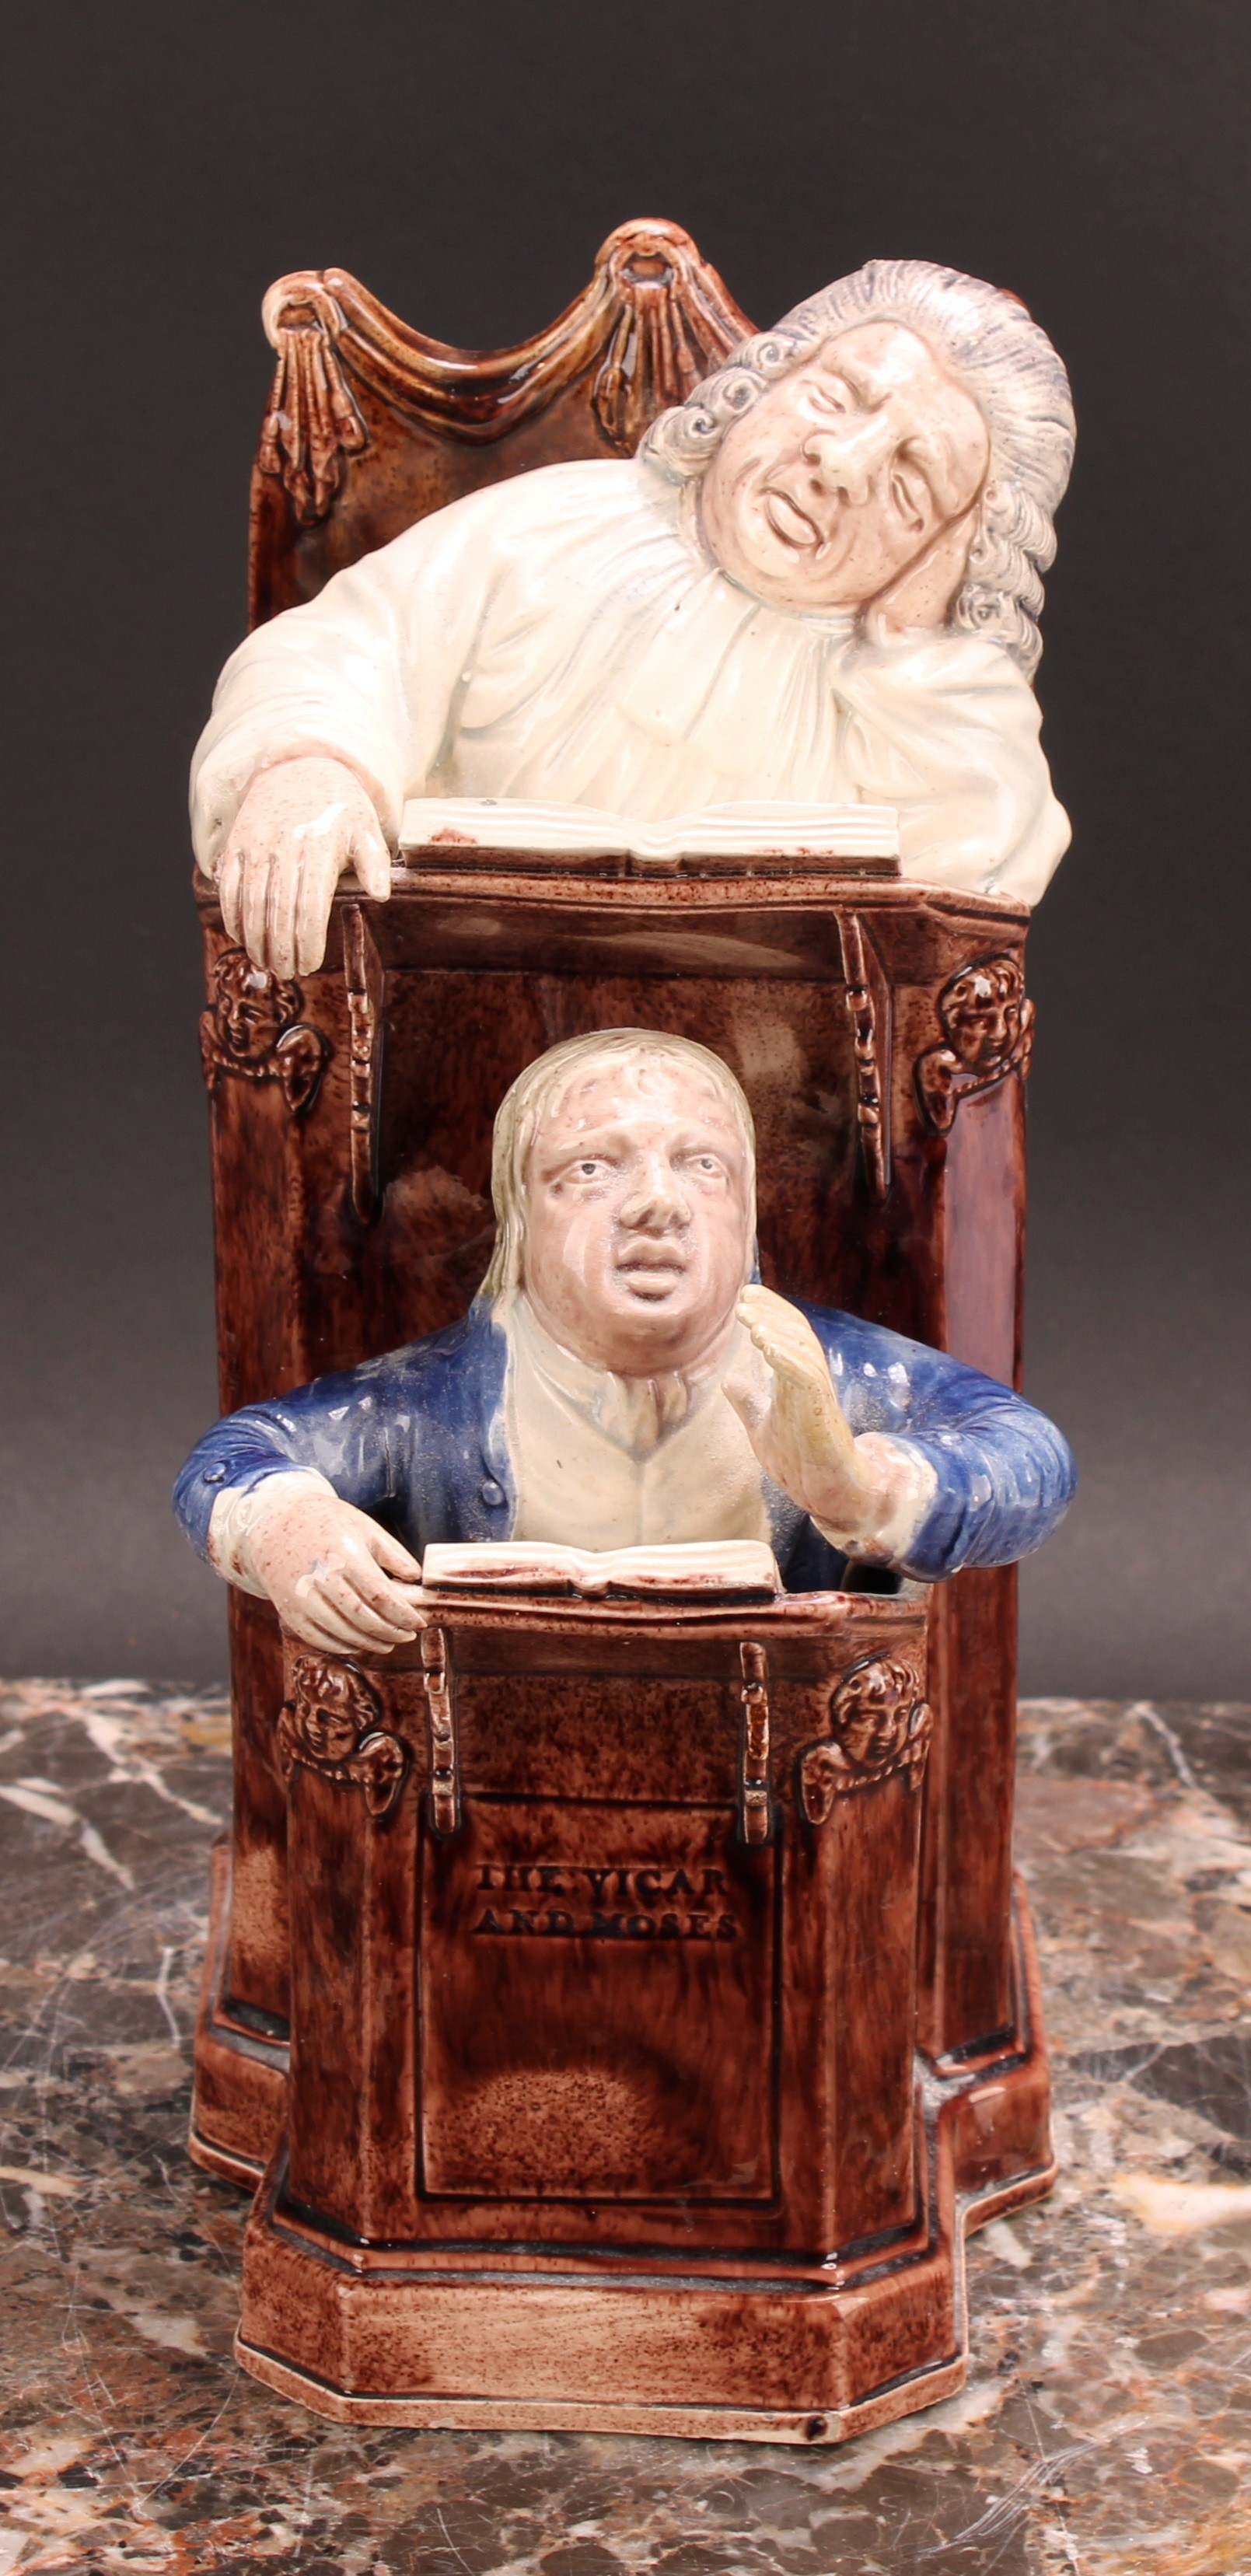 A Staffordshire pearlware figure group, The Vicar and Moses, with a sleeping vicar in the higher - Image 2 of 6